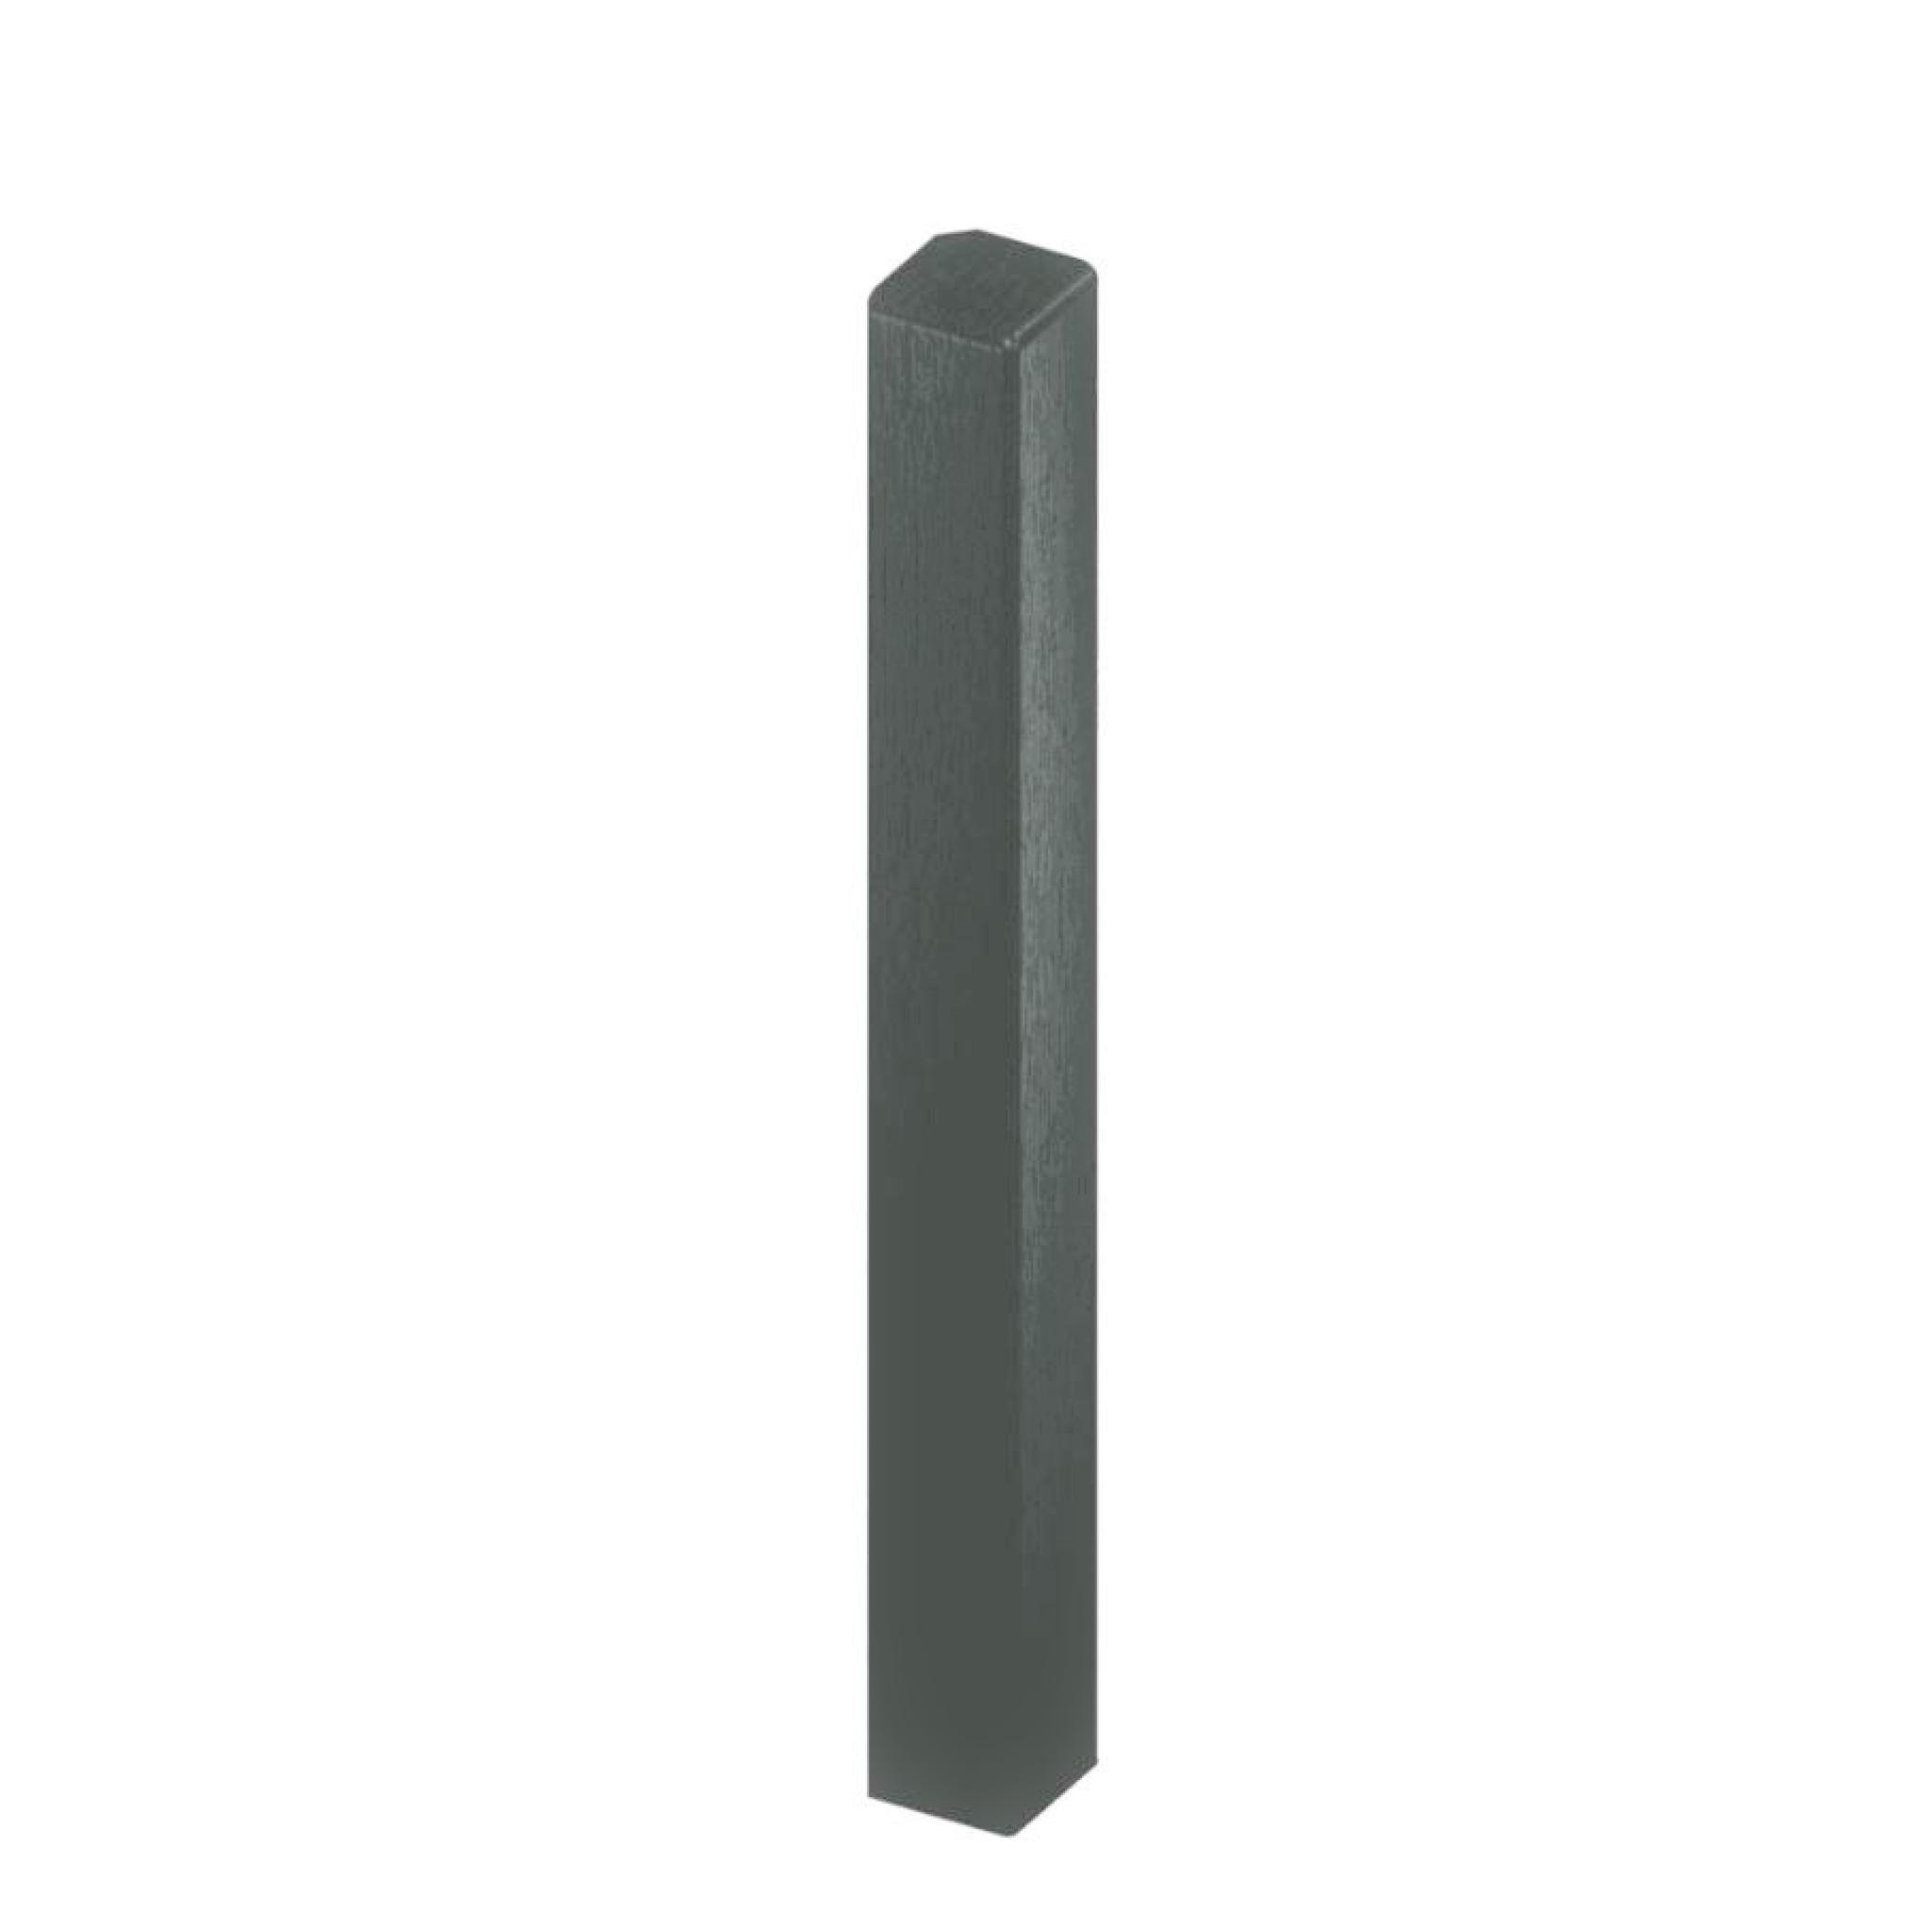 450mm Anthracite Dark Grey Fascia Corner - Double Ended